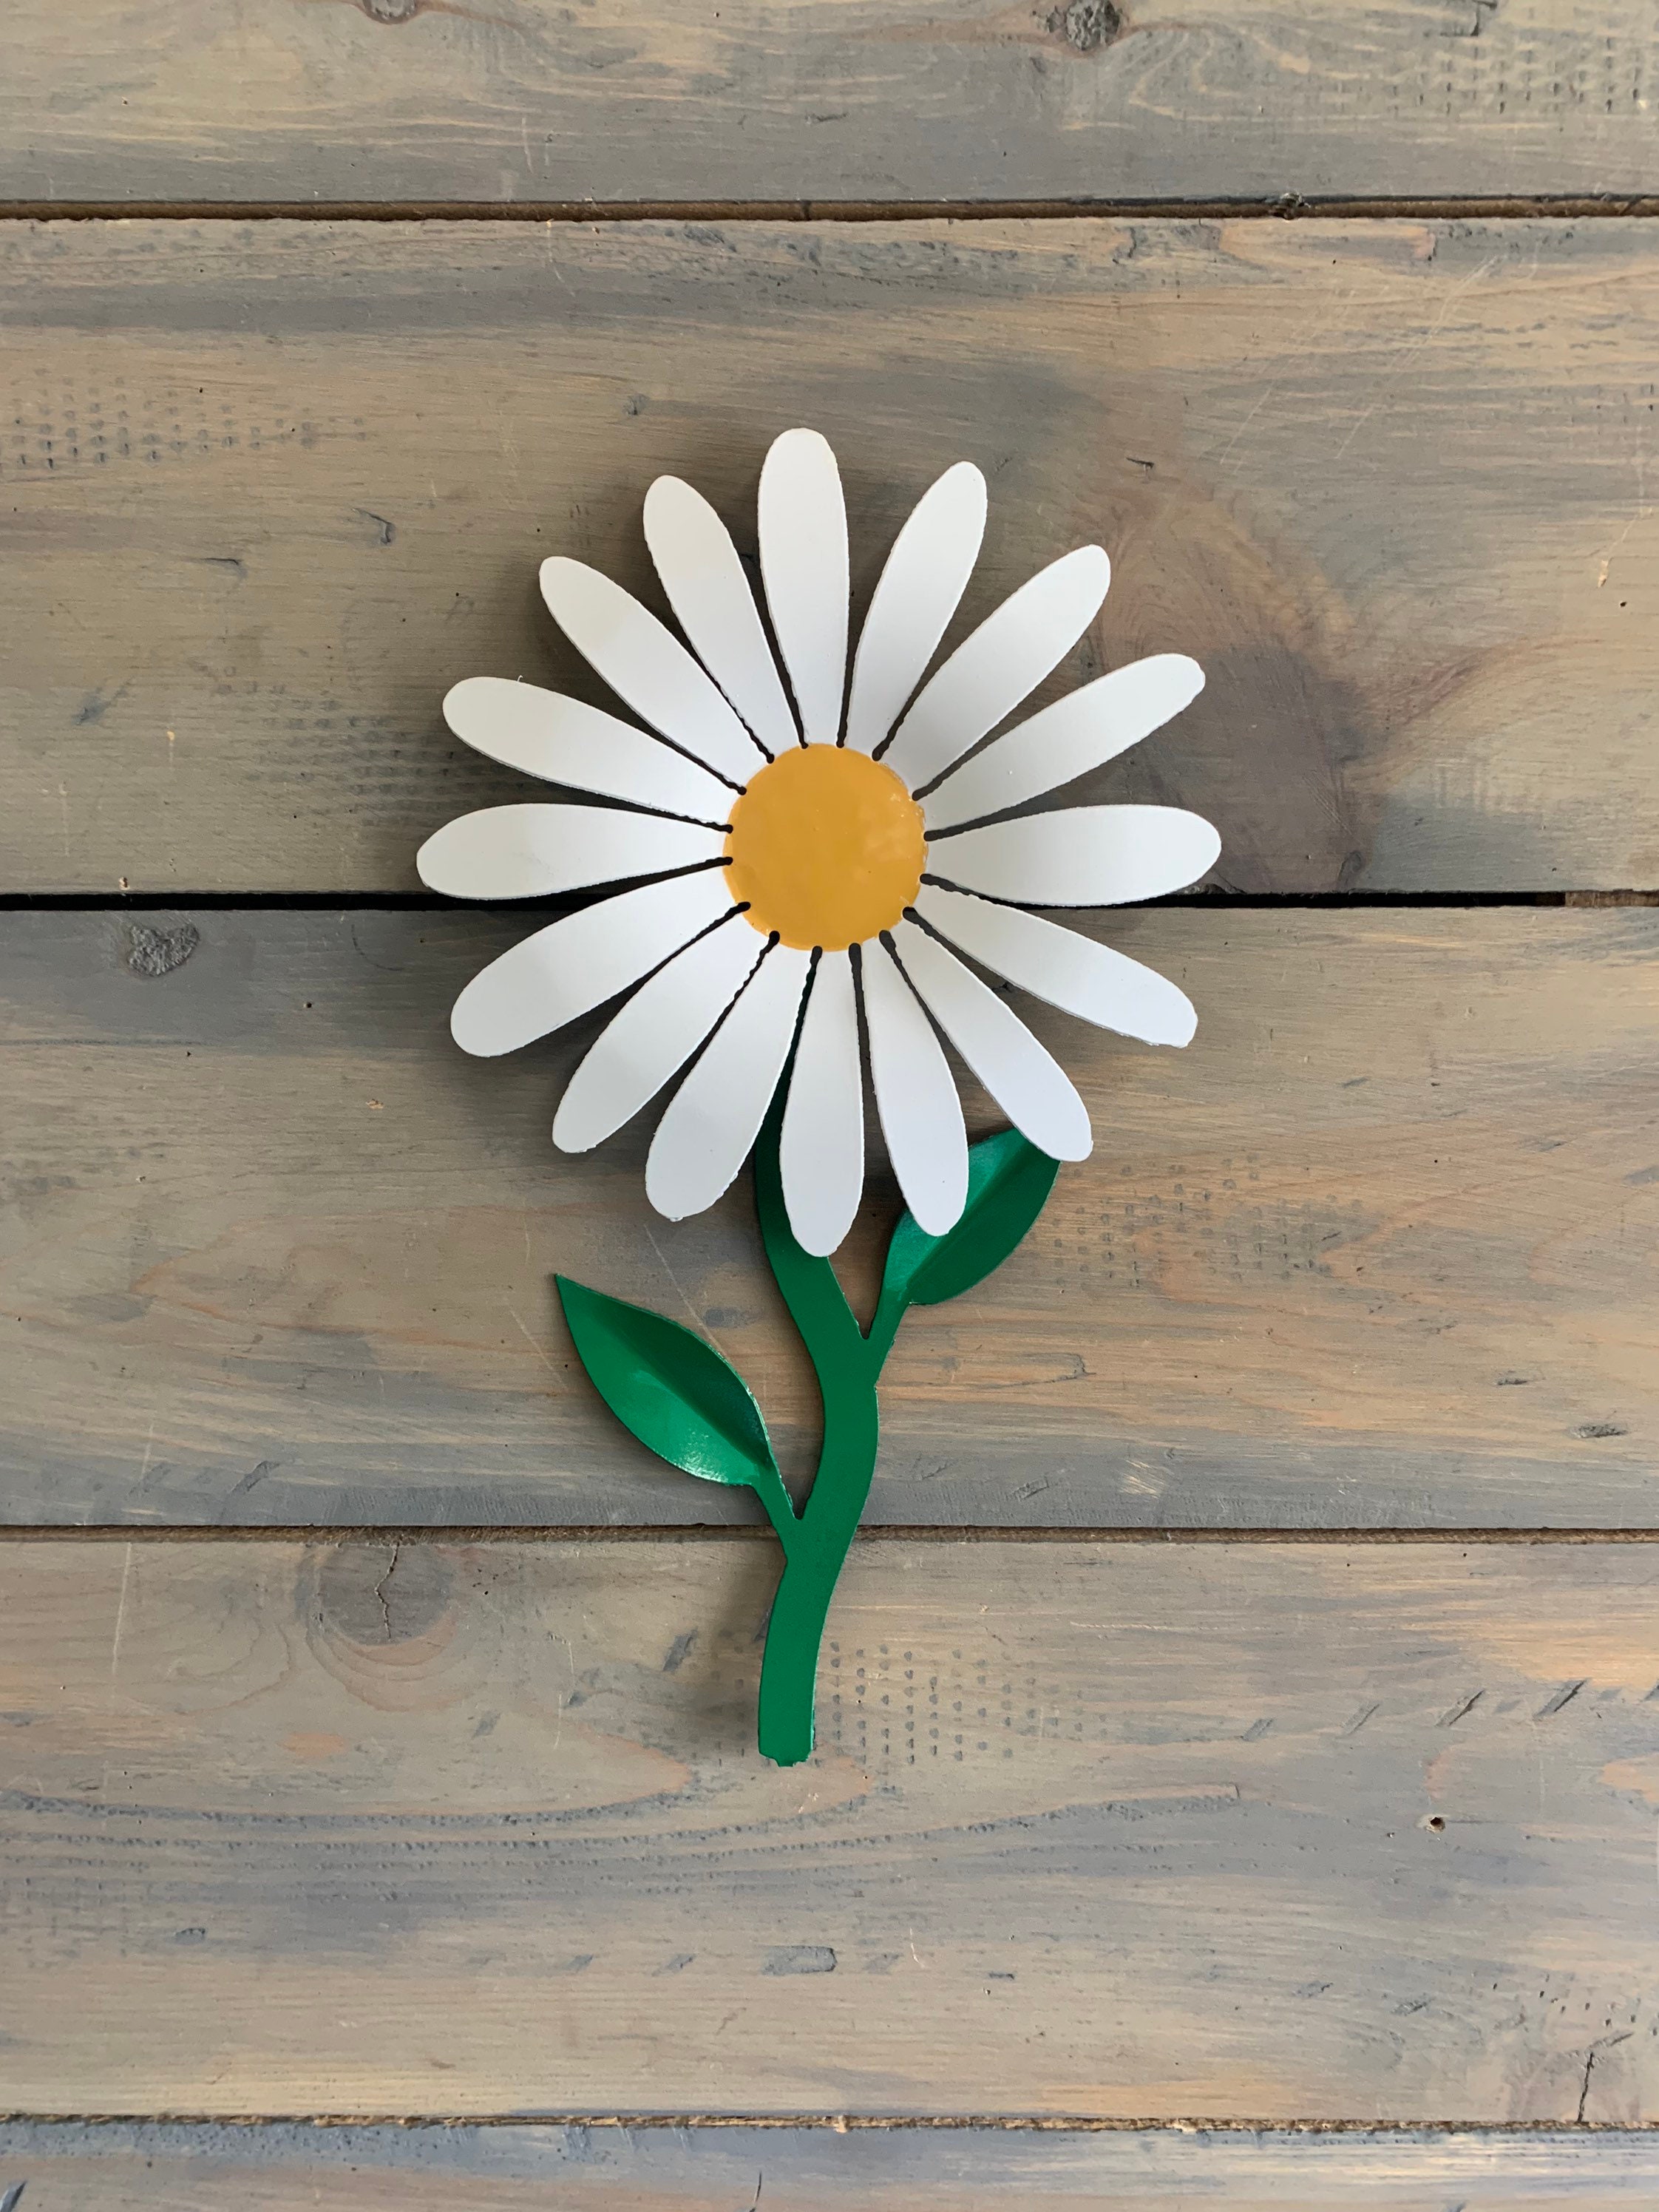 Wall Daisy Flower,home Decoration , Home Decor, White and Yellow Daisy With  Green Stem, Wall Accents, White Flower 